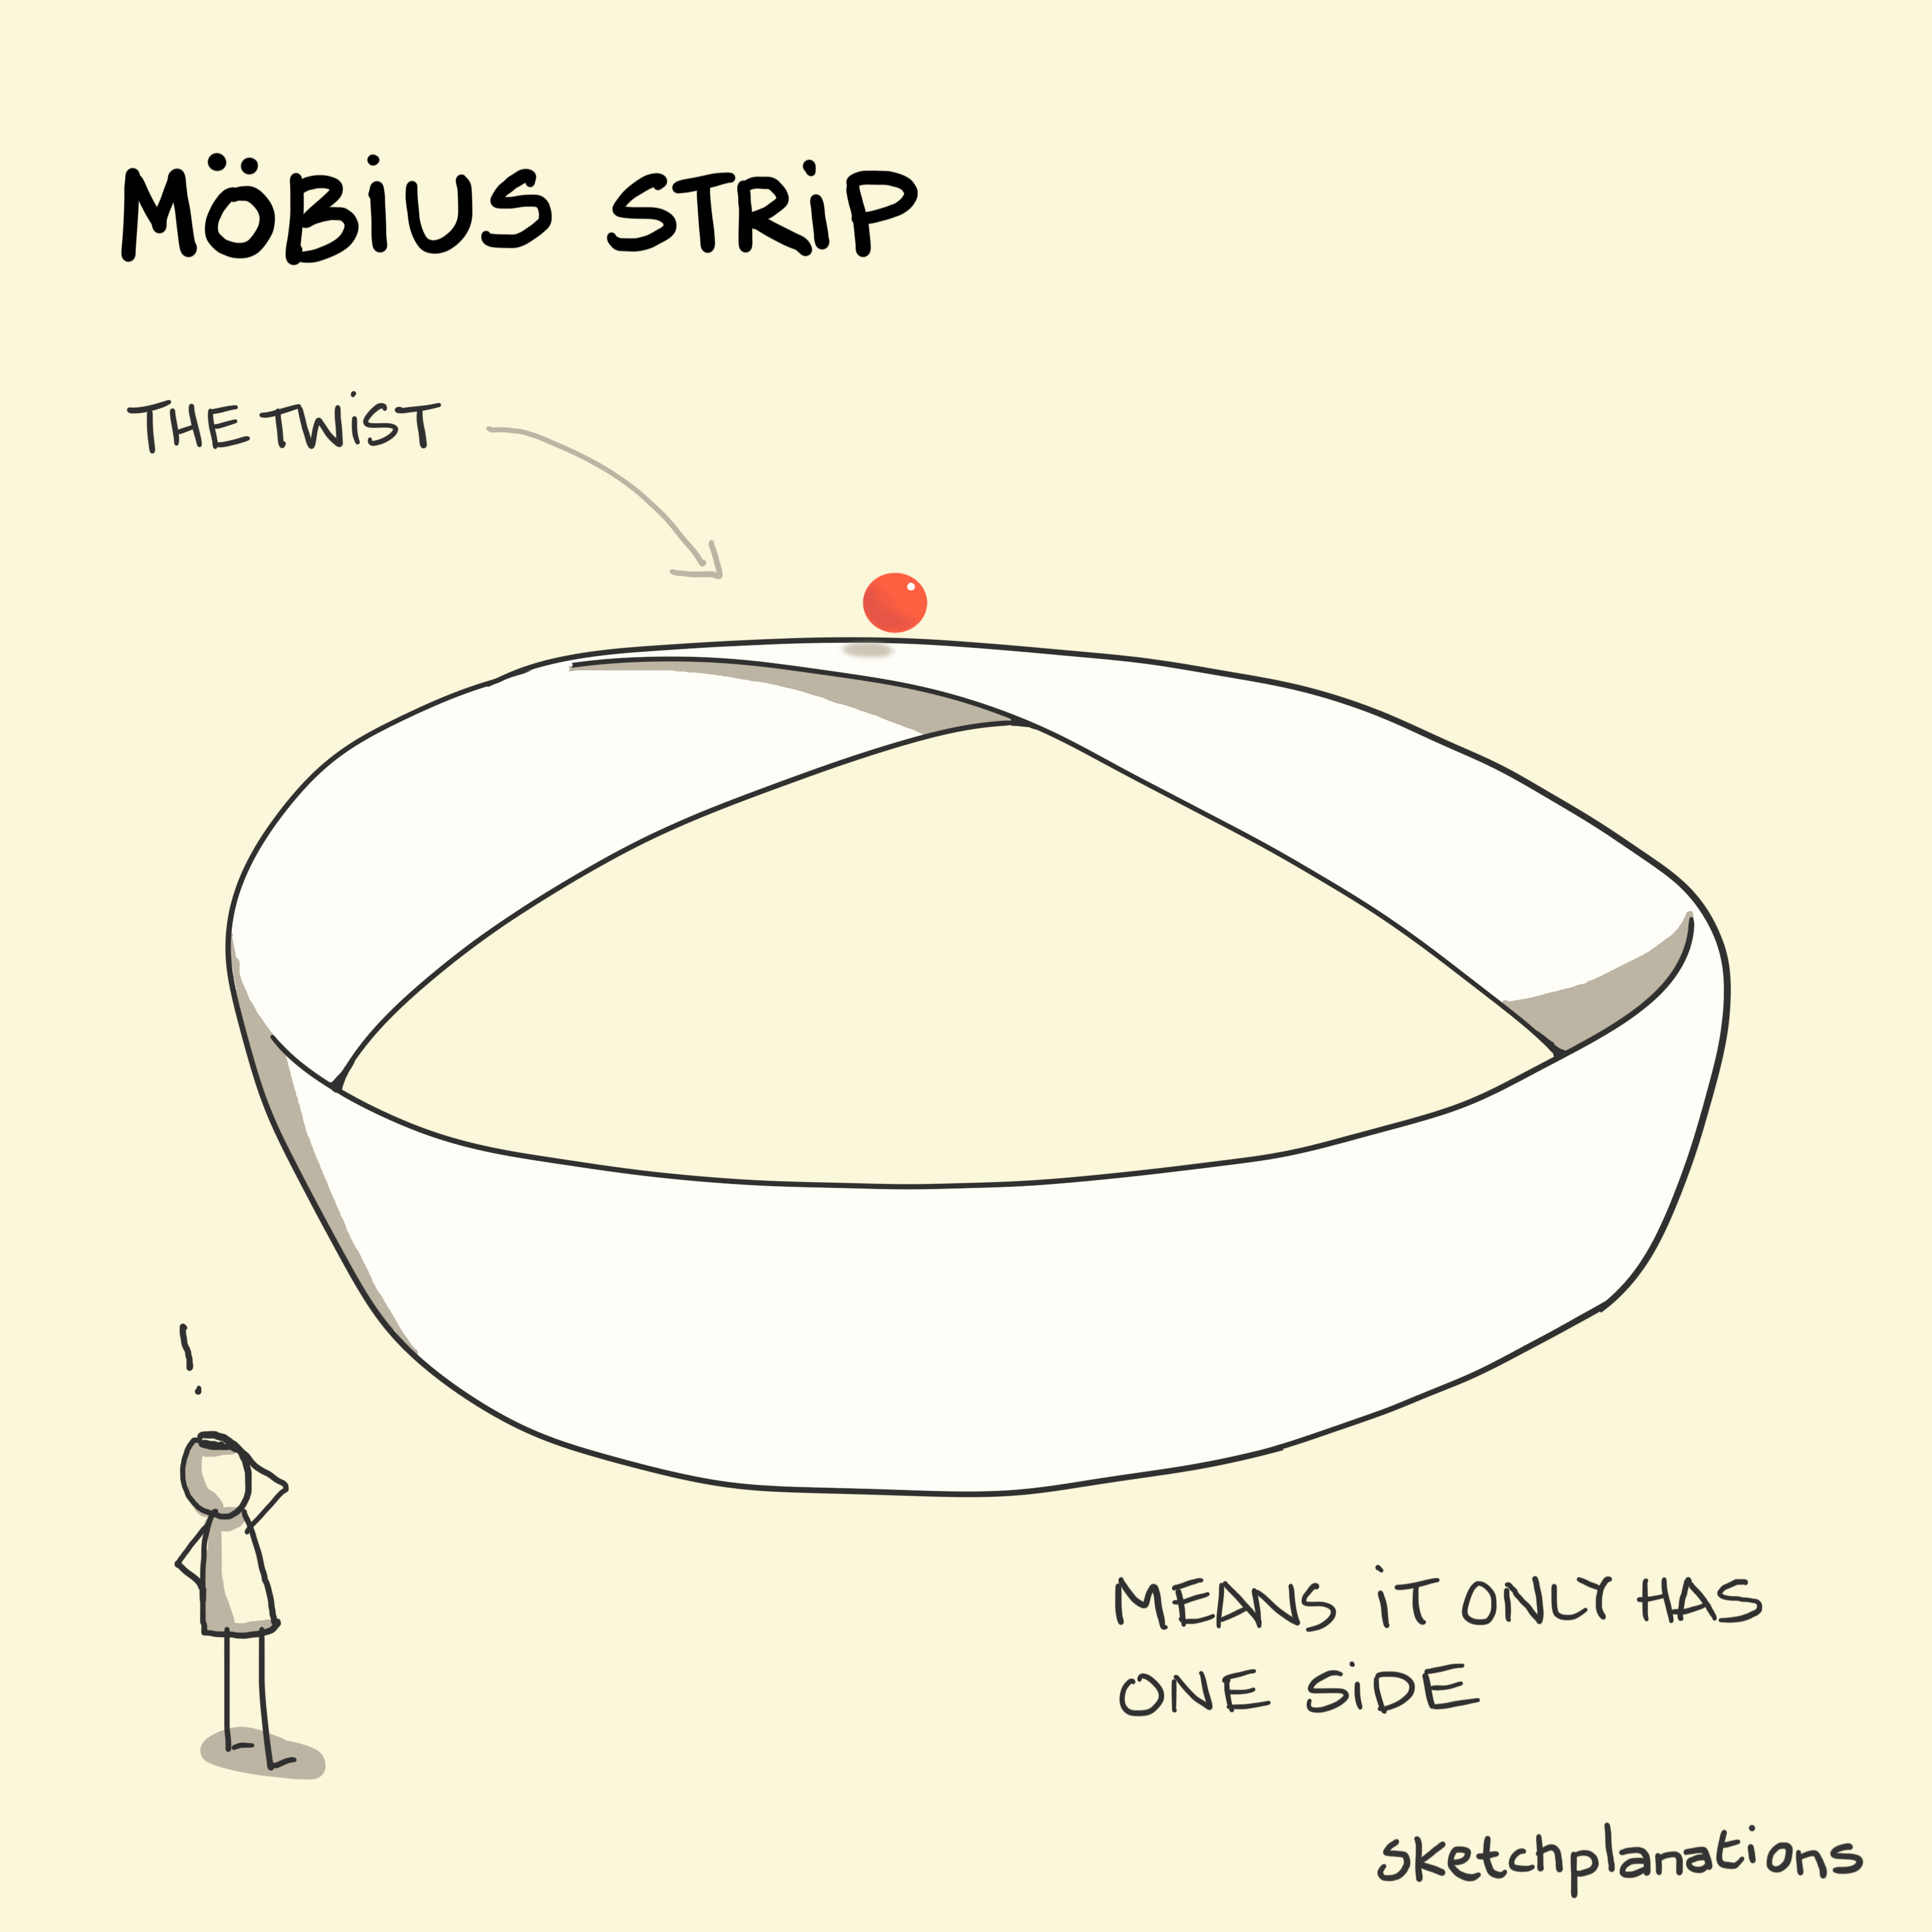 Mobius strip animation by Sketchplanations.